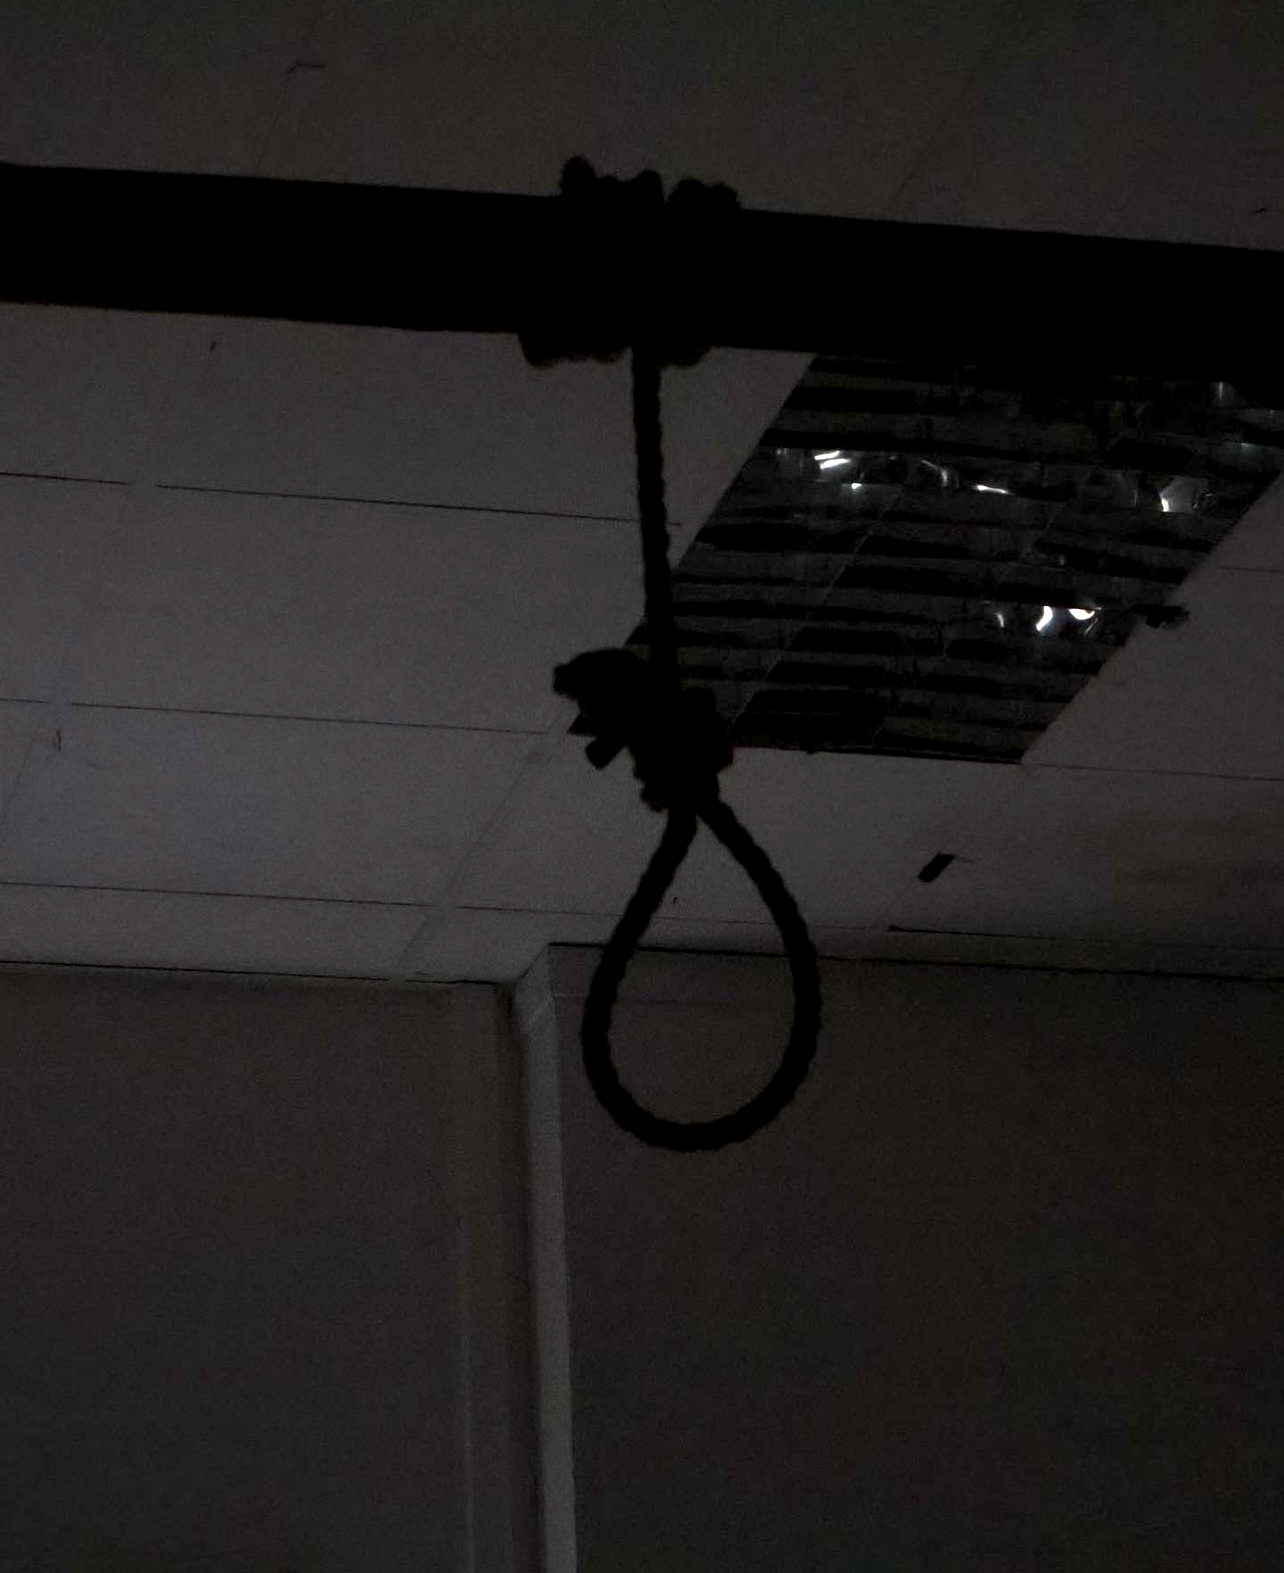 An image of a noose hanging from a ceiling.